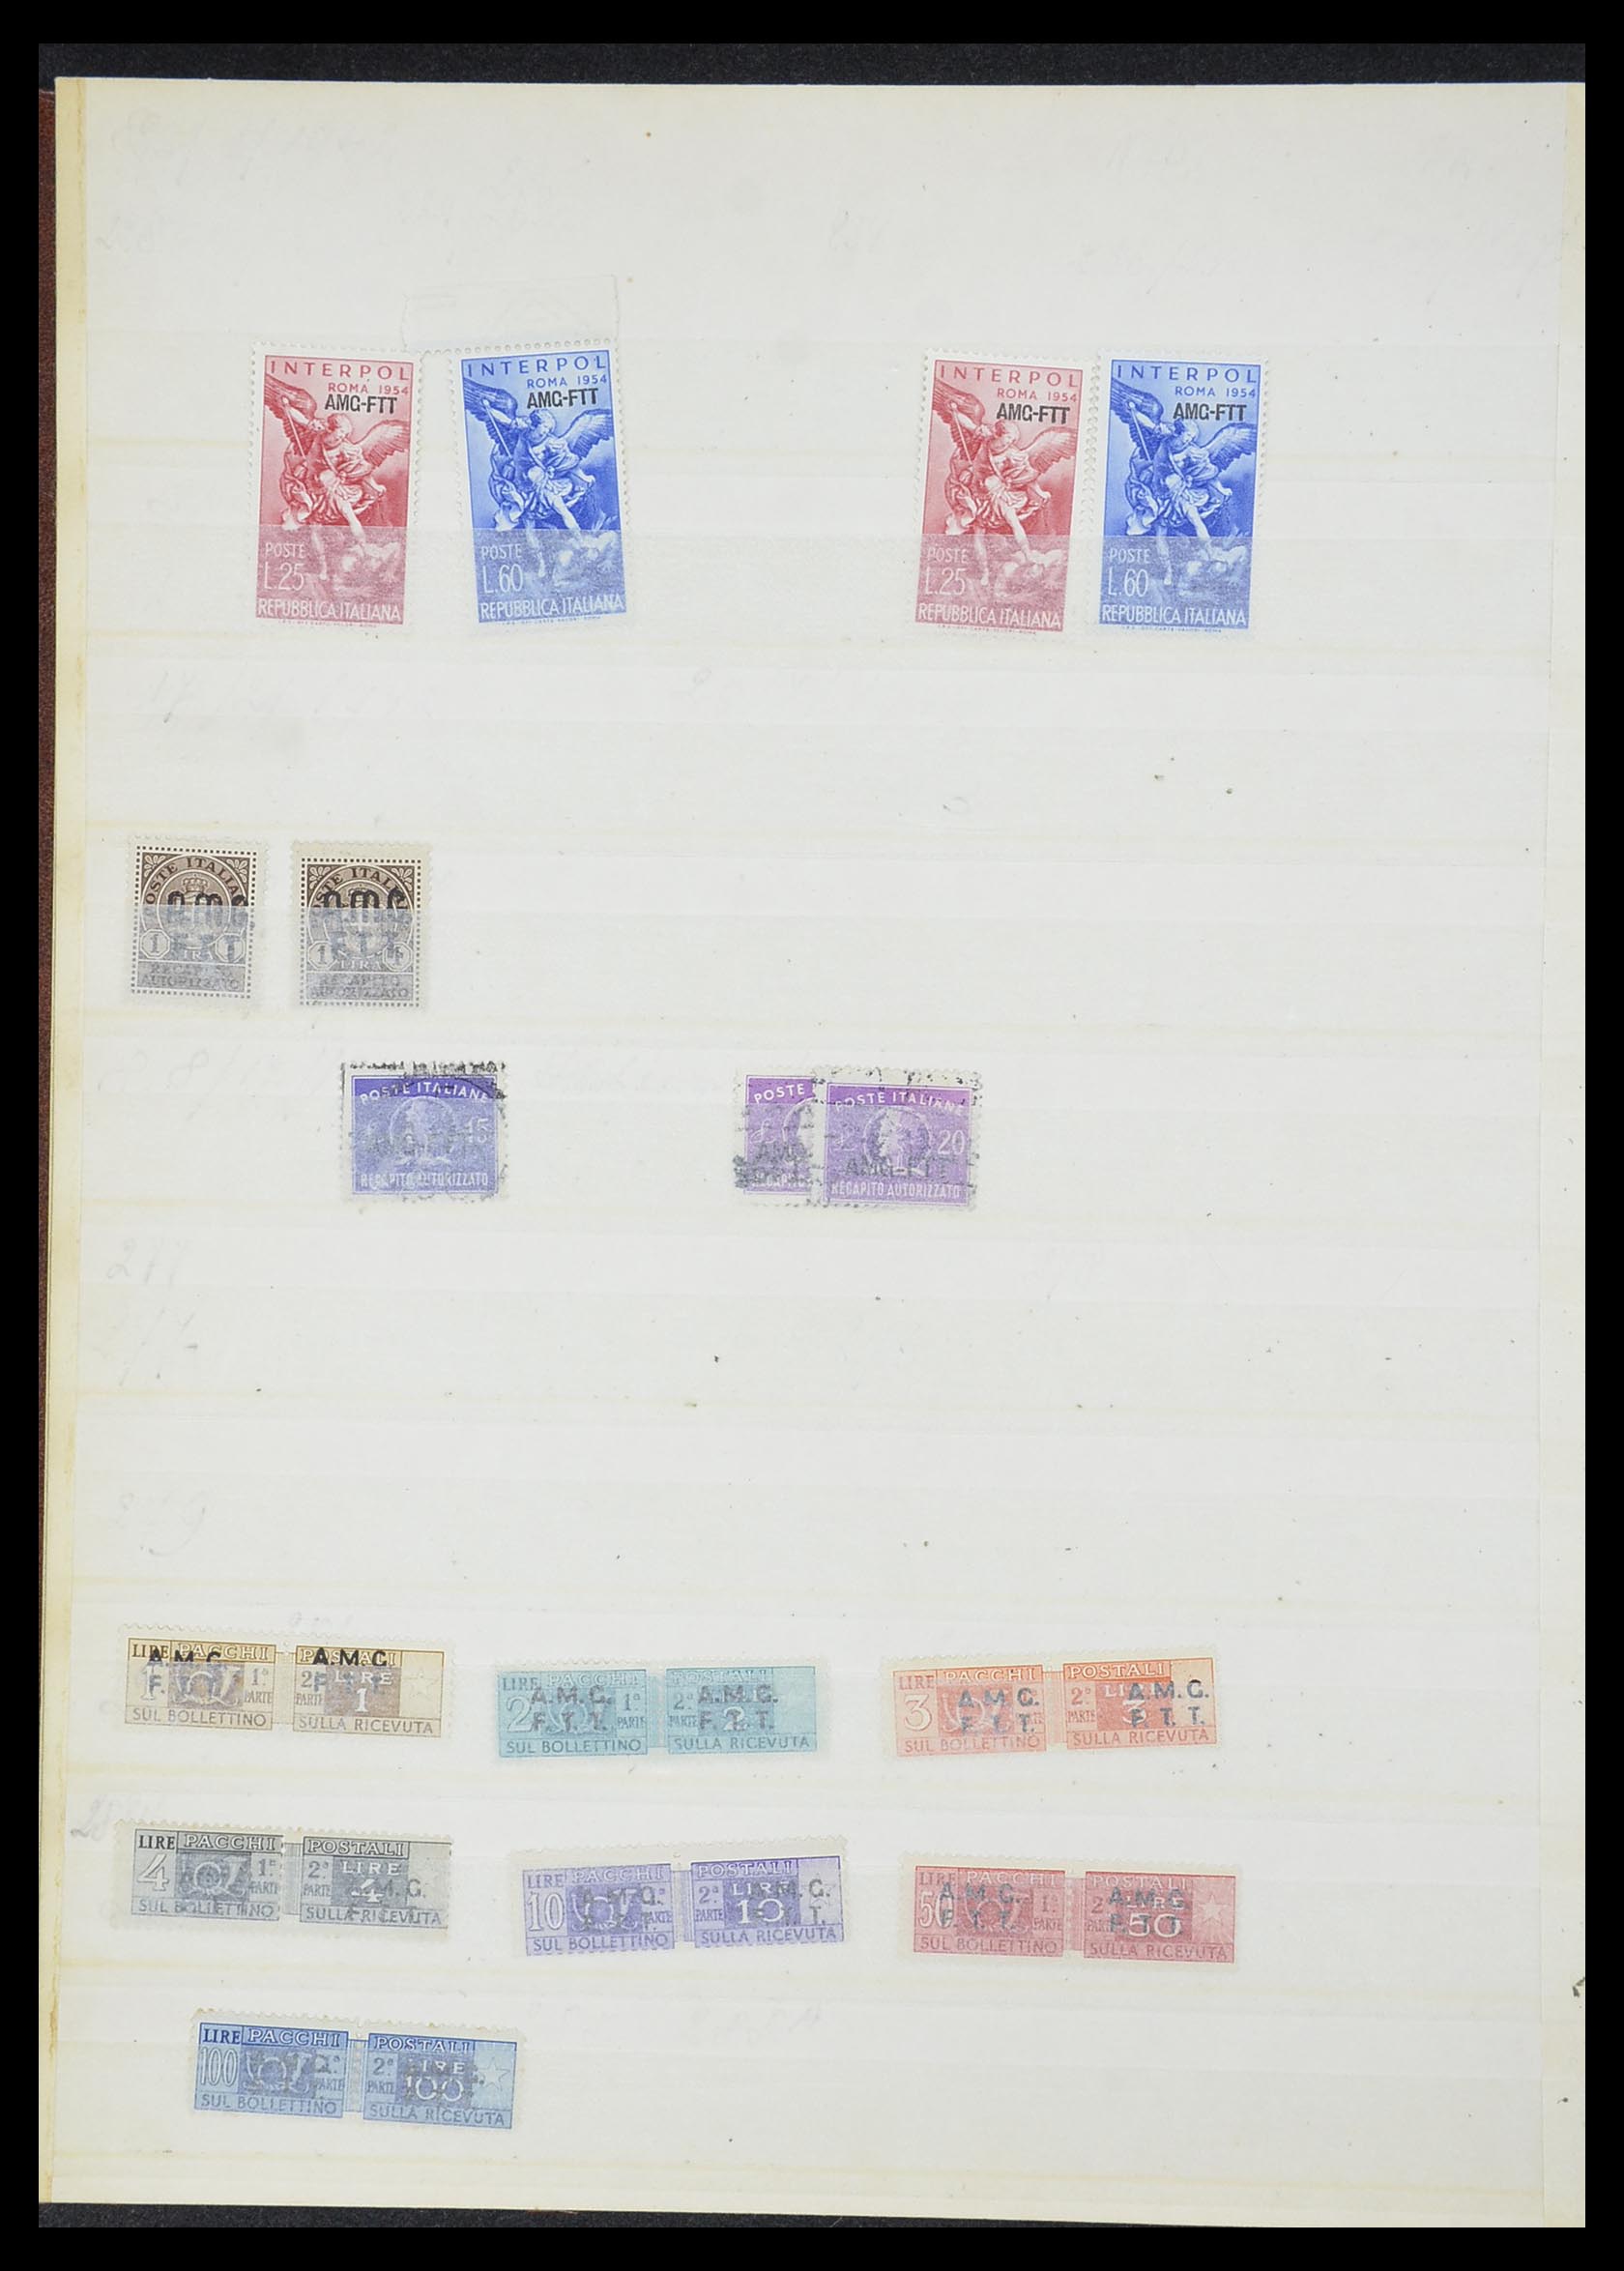 33917 014 - Stamp collection 33917 Triest, Campione and territories 1890-1960.